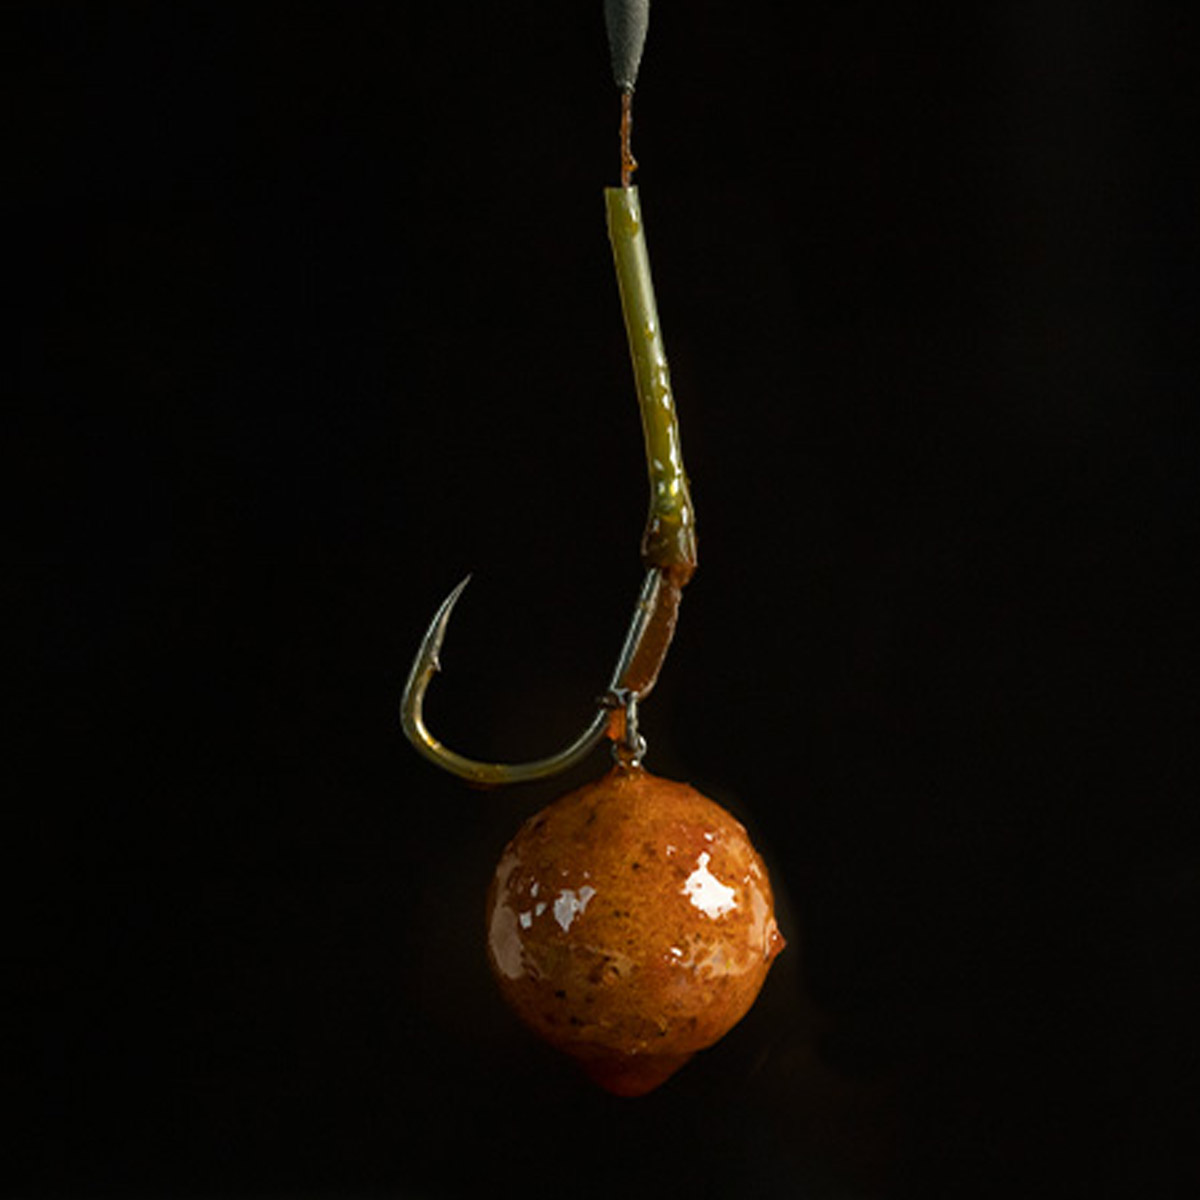 Sticky Baits The Krill Wafters 16MM